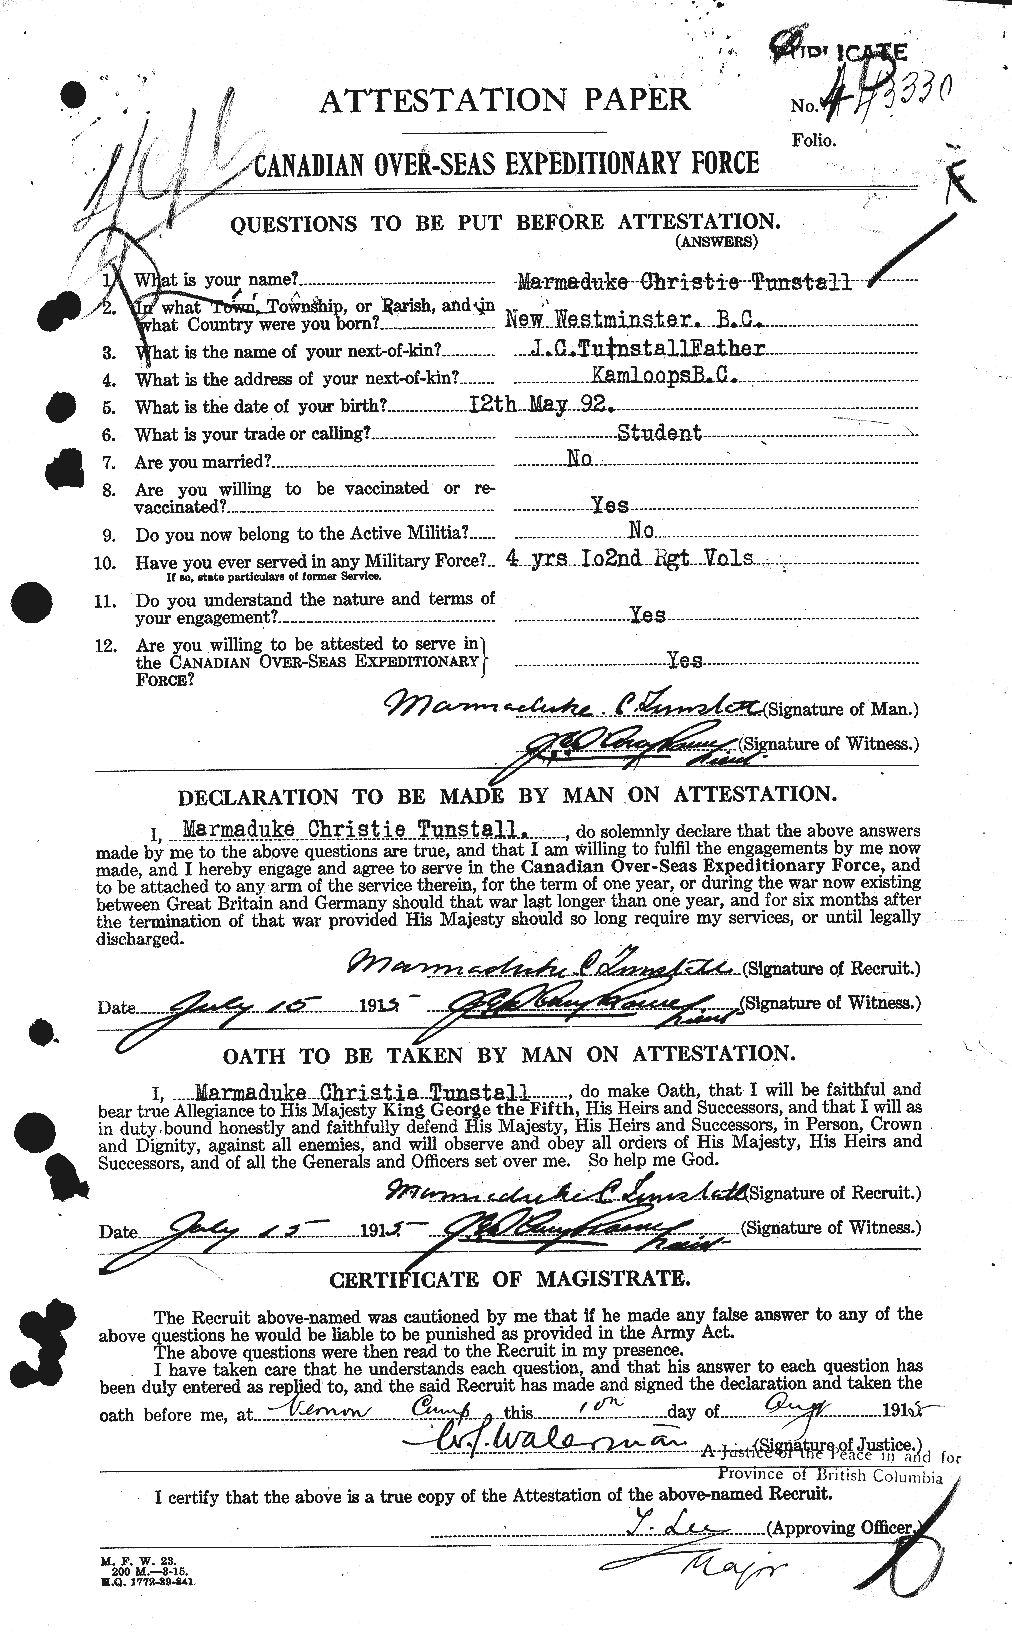 Personnel Records of the First World War - CEF 644506a